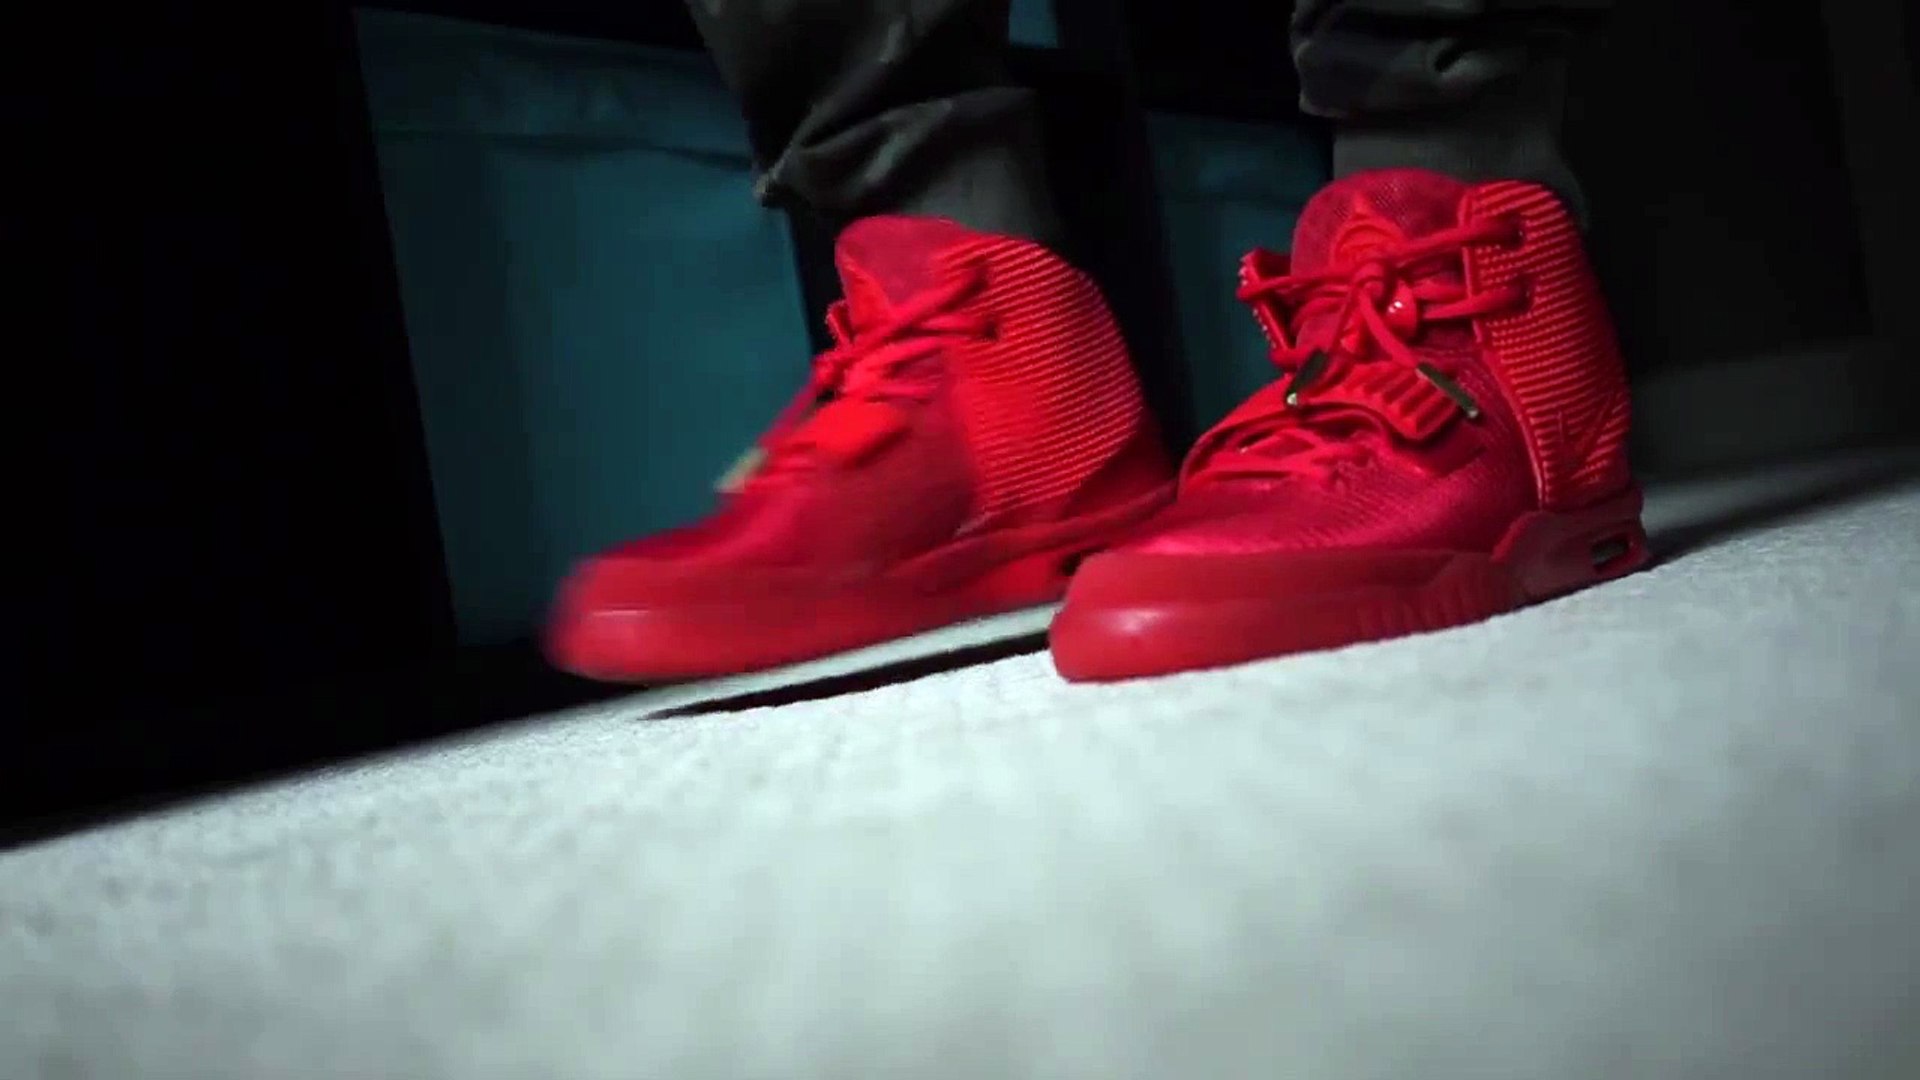 Nike Yeezy 2 Red October Replica on Feet - video Dailymotion